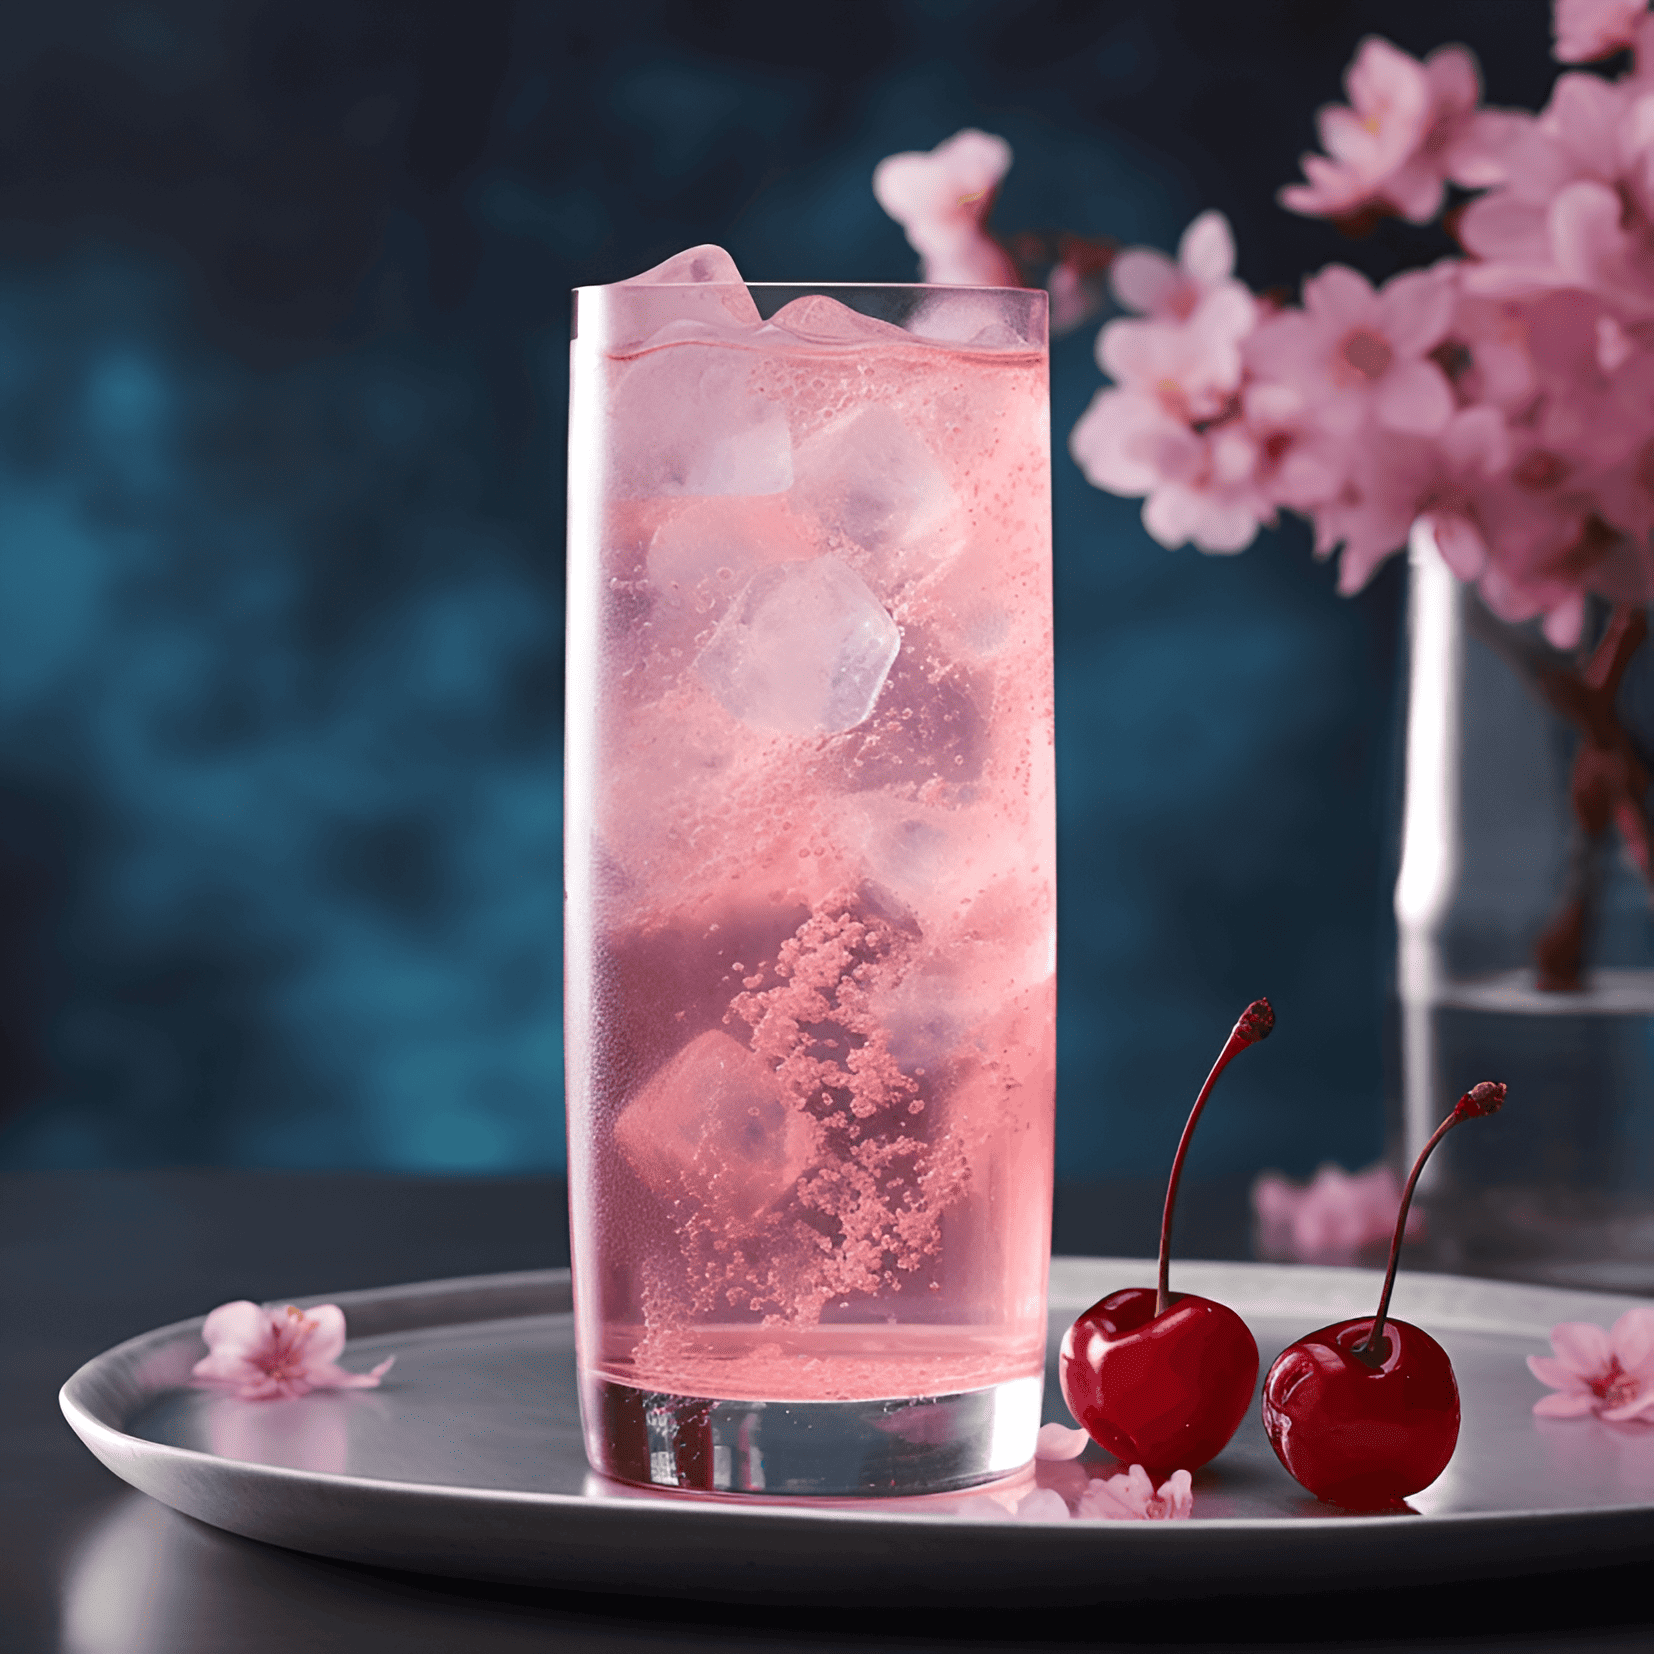 Cherry Blossom Cocktail Recipe - The Cherry Blossom cocktail has a delicate, fruity, and floral taste. It is slightly sweet, with a hint of tartness from the cherry and citrus flavors. The floral notes from the elderflower liqueur add a touch of sophistication, while the gin provides a subtle, refreshing kick.